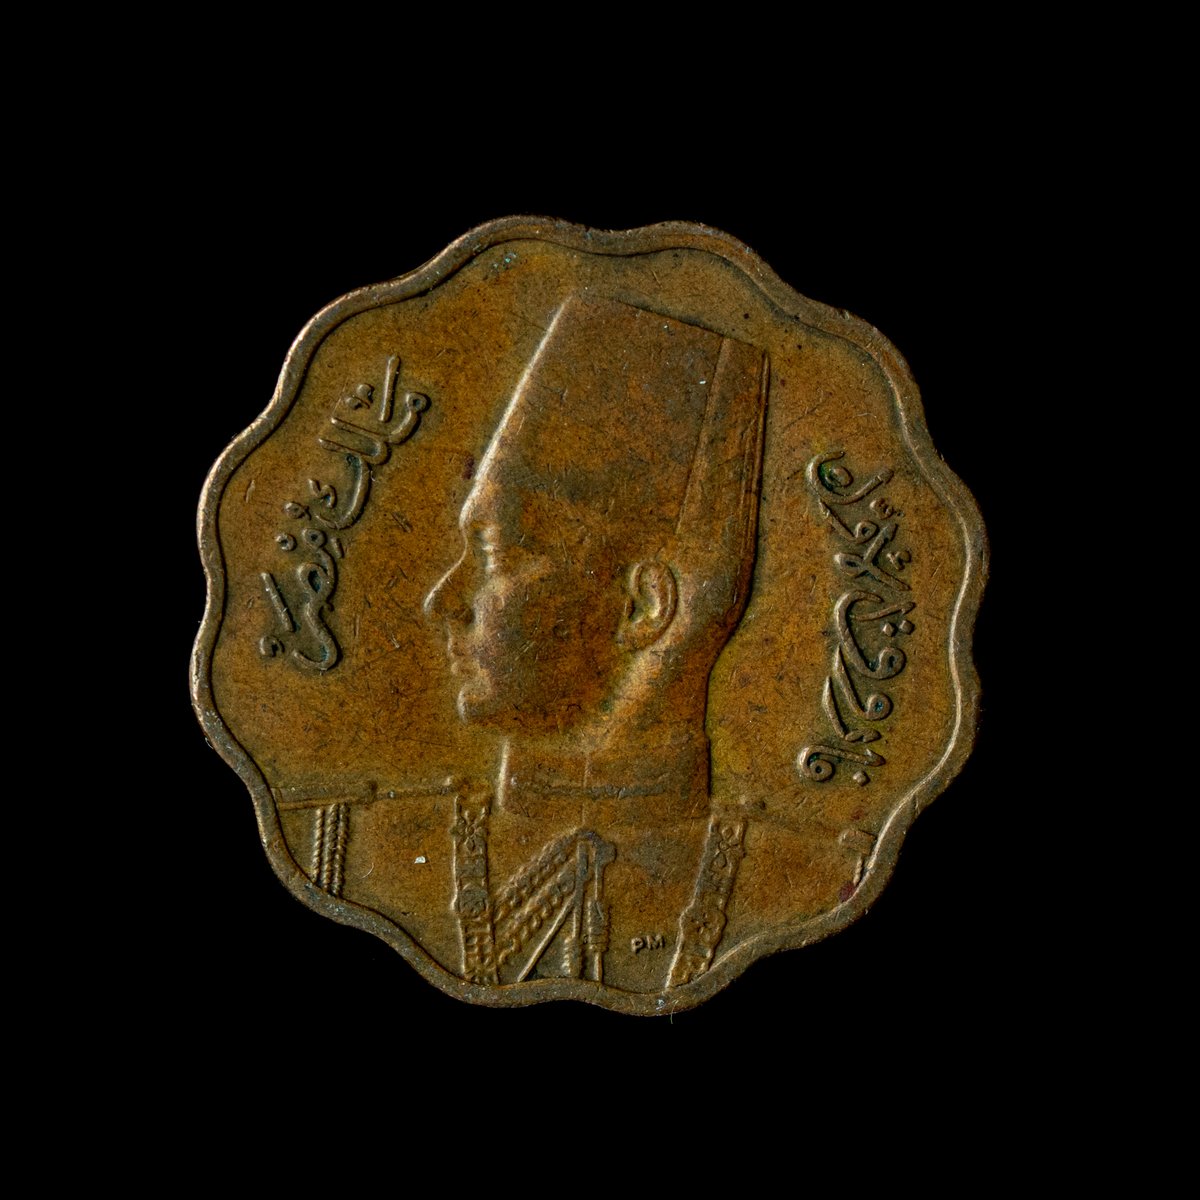 Step back in time with this stunning 1943 Egyptian Ten Milliemes coin. A piece of history in your palm, showcasing Egypt's rich cultural heritage. 

#HistoryInCoins #EgyptianTreasure #VintageCurrency #OnThisDayIn1943 #numismatics